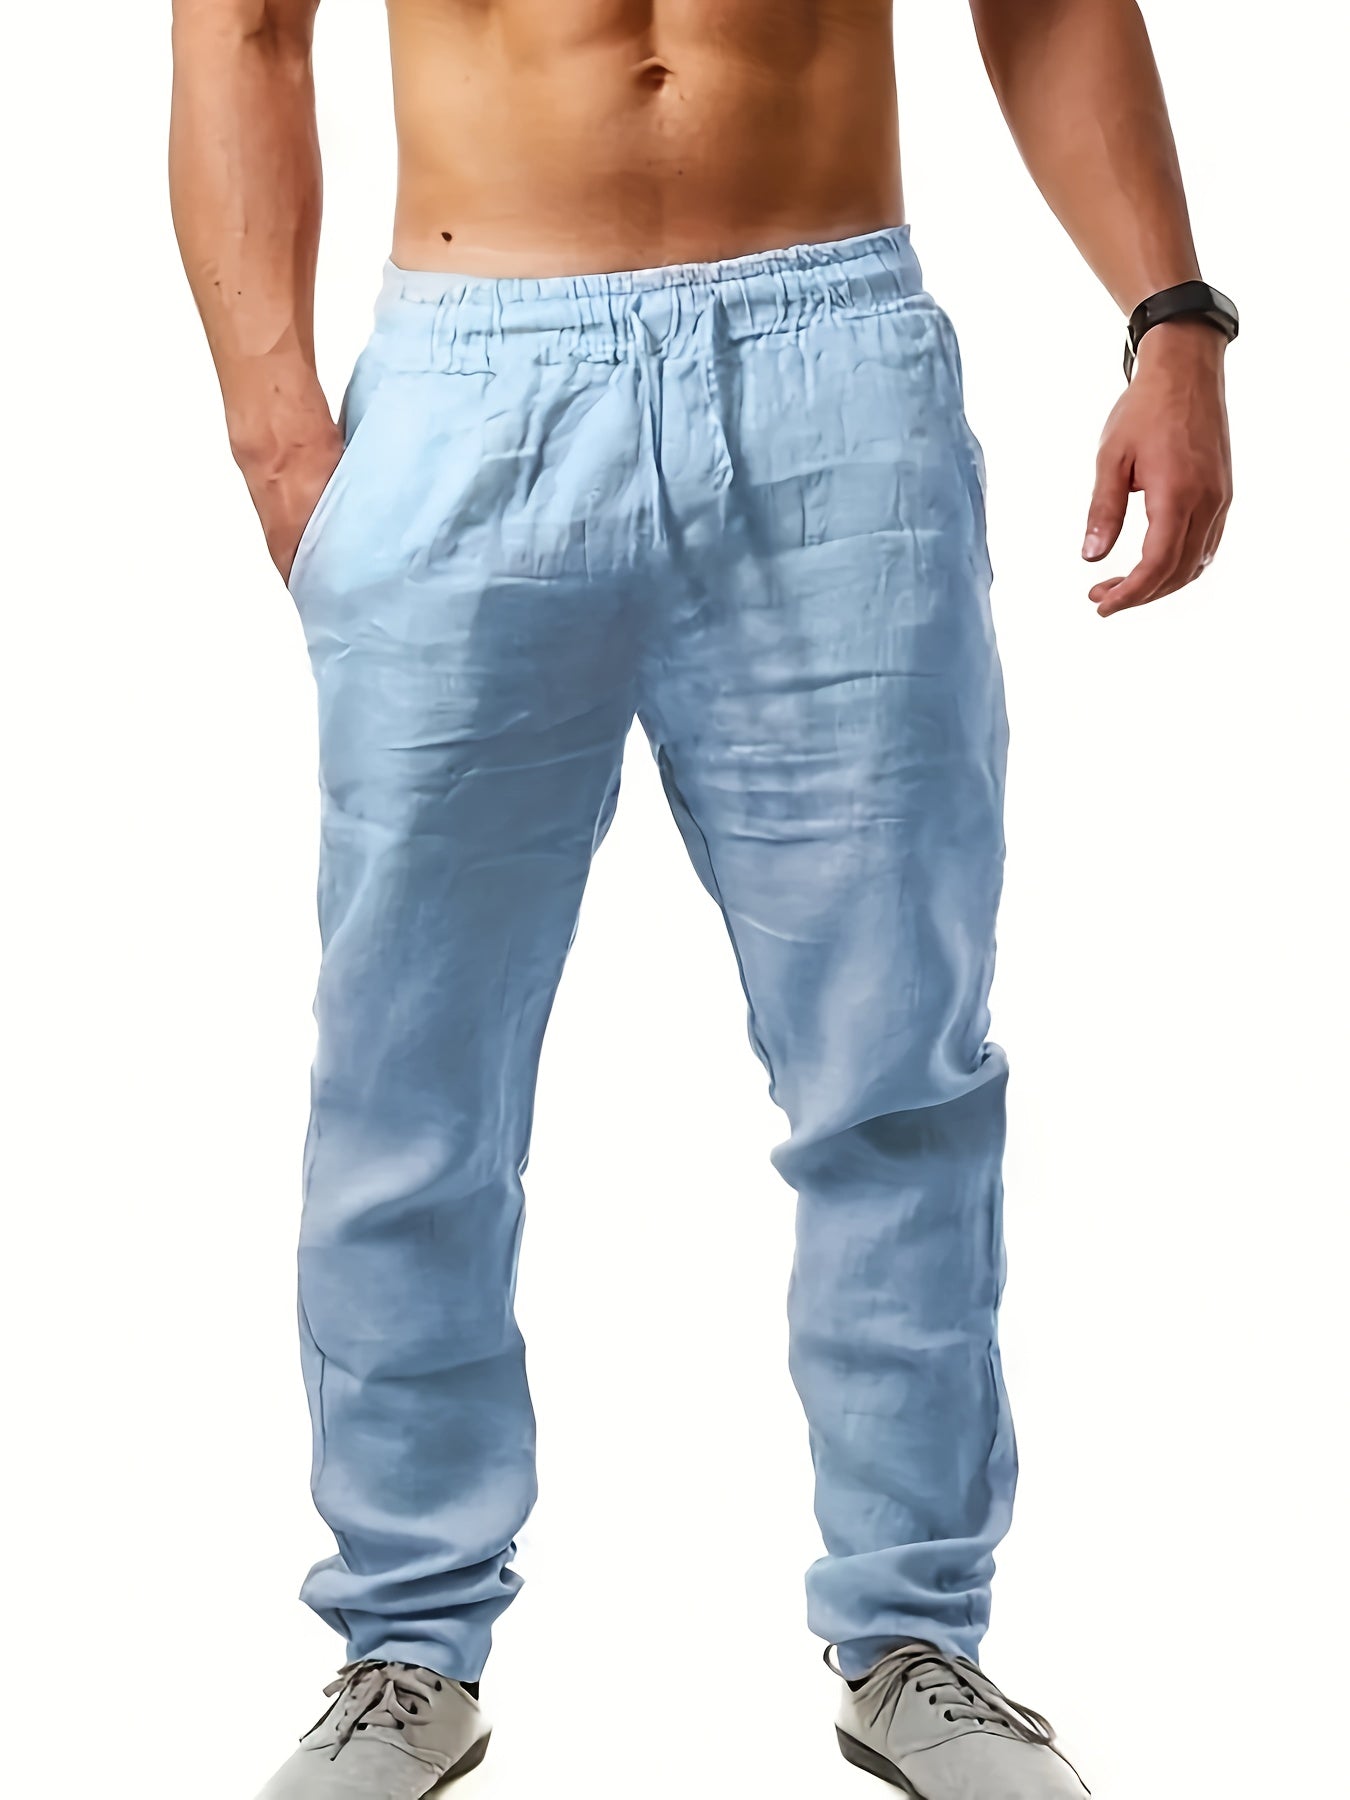 Fashionable Men's Solid Drawstring Casual Linen Pants,Suitable For Outdoor Sports, Comfortable And Versatile